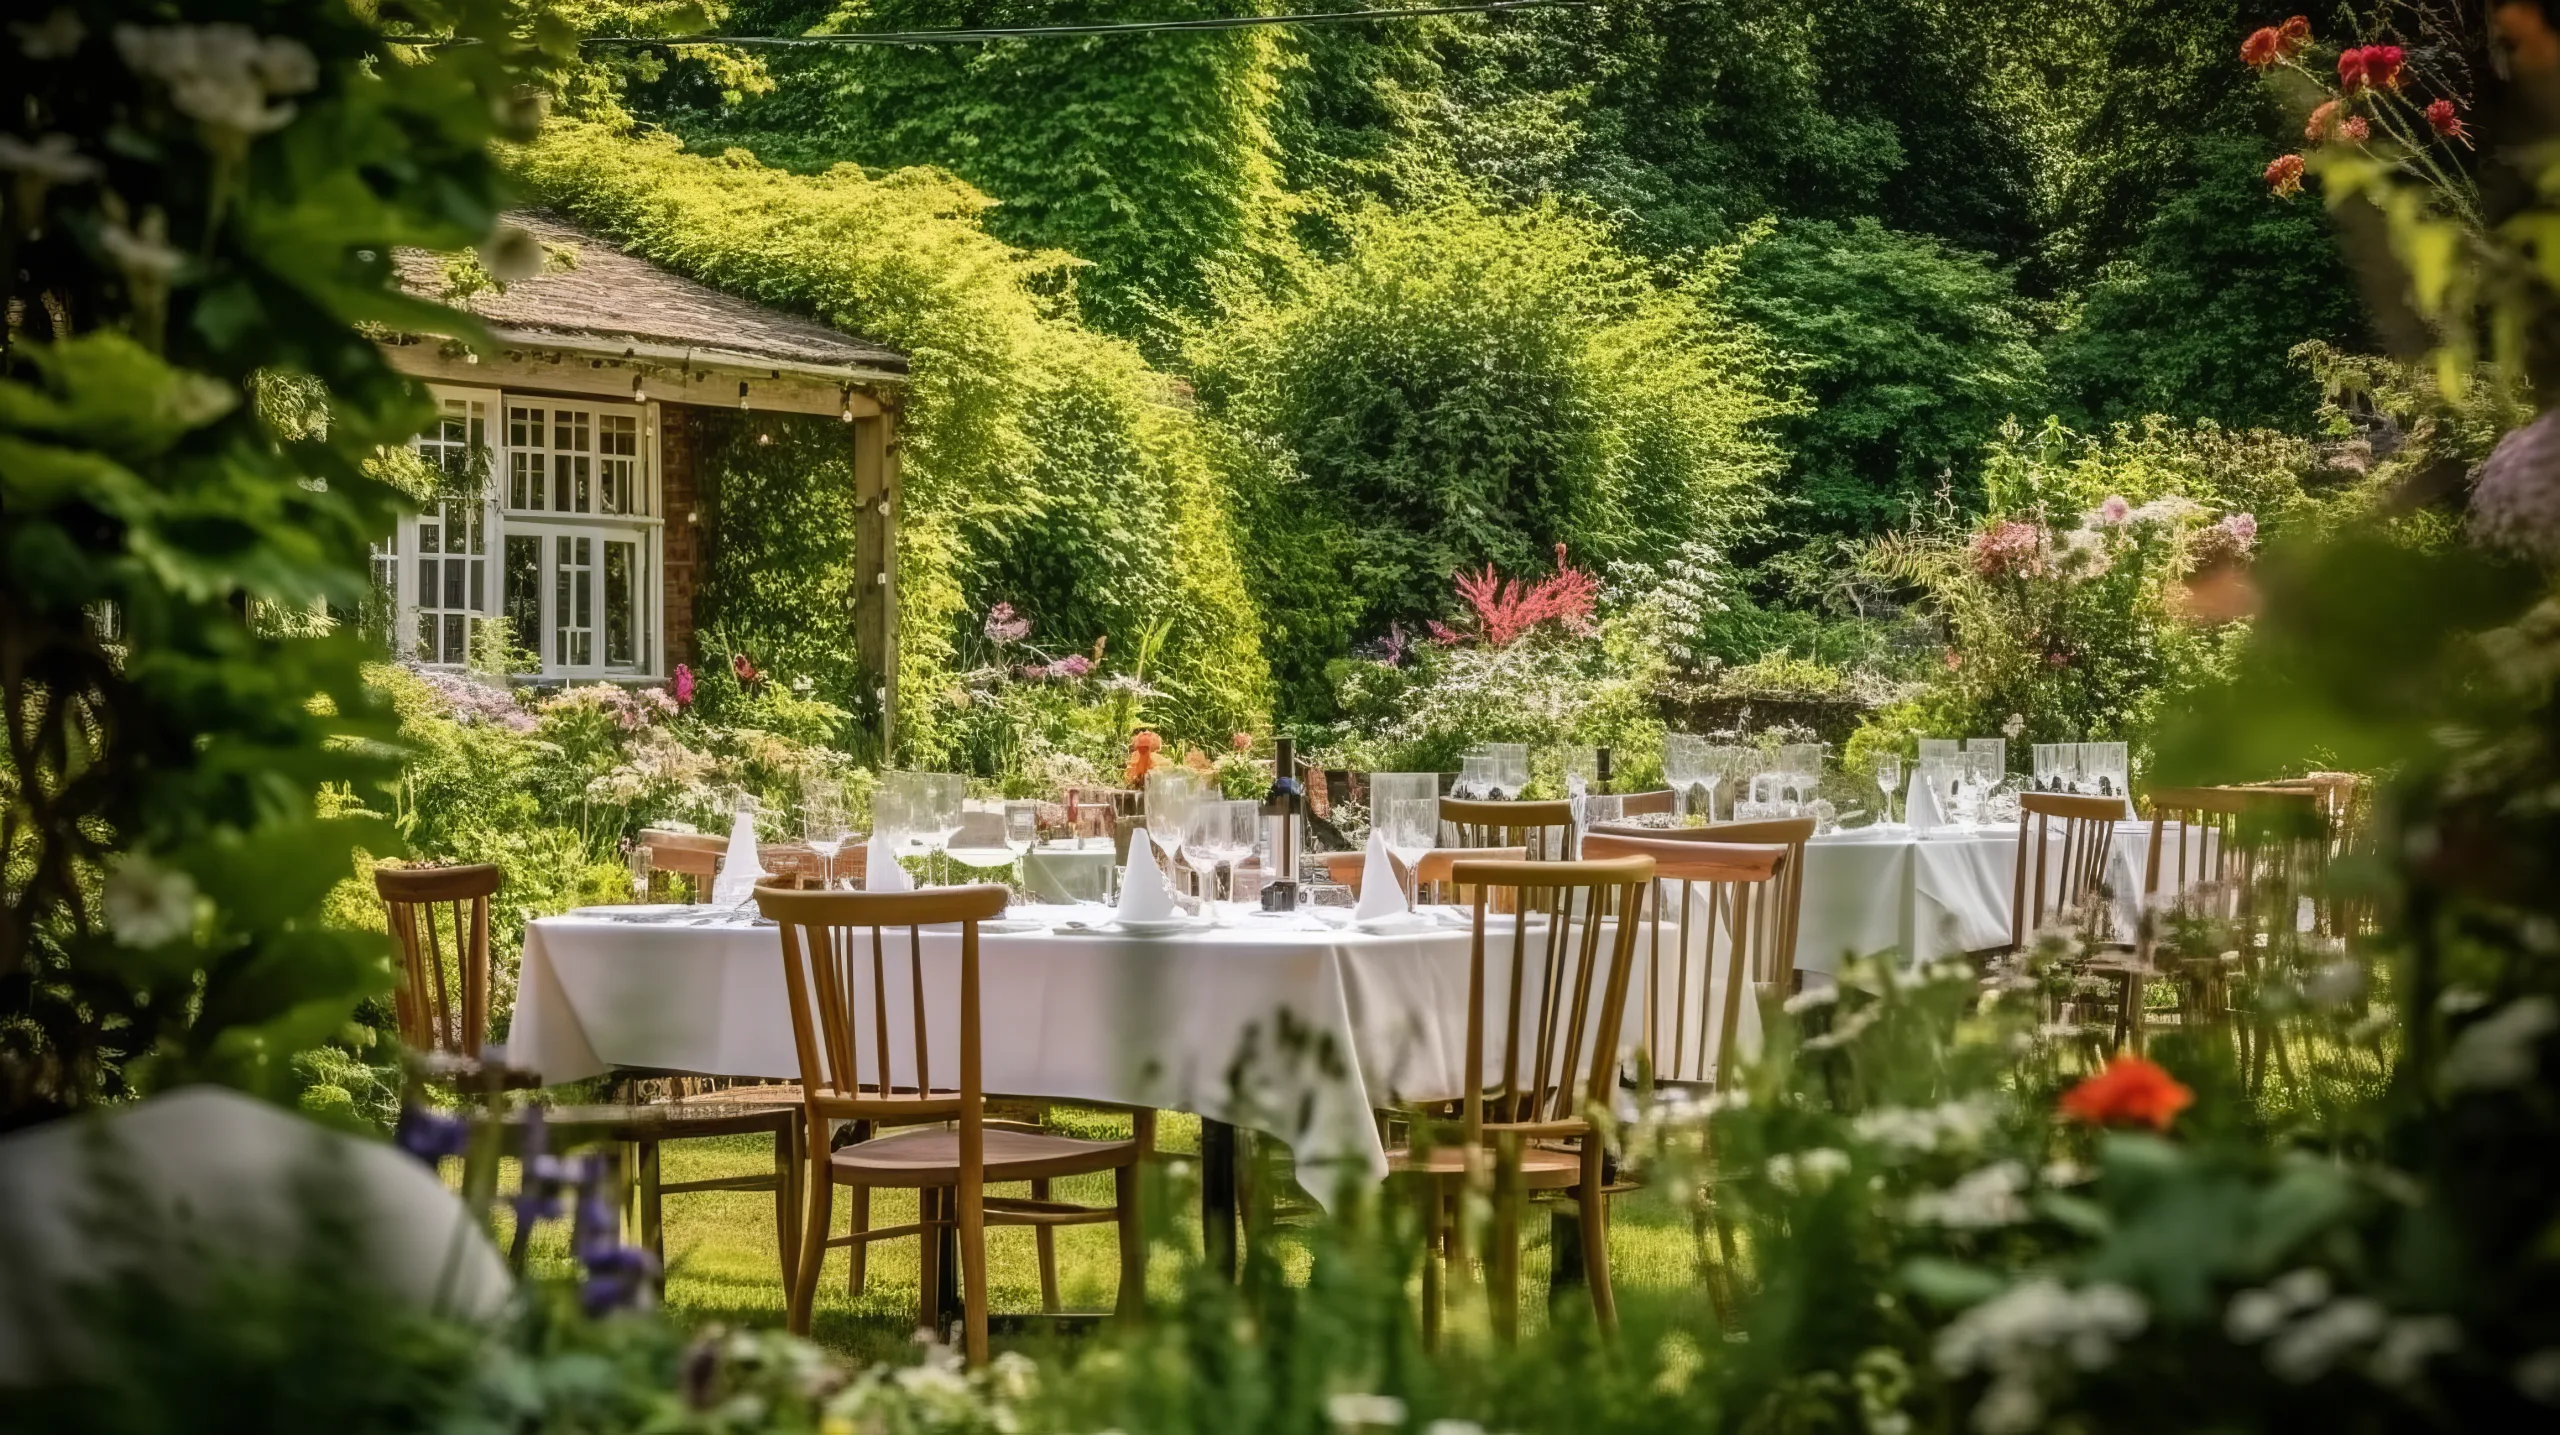 Wick farm: The Art of Photography: Ford Abbey:a table set up for a formal dinner in a garden.